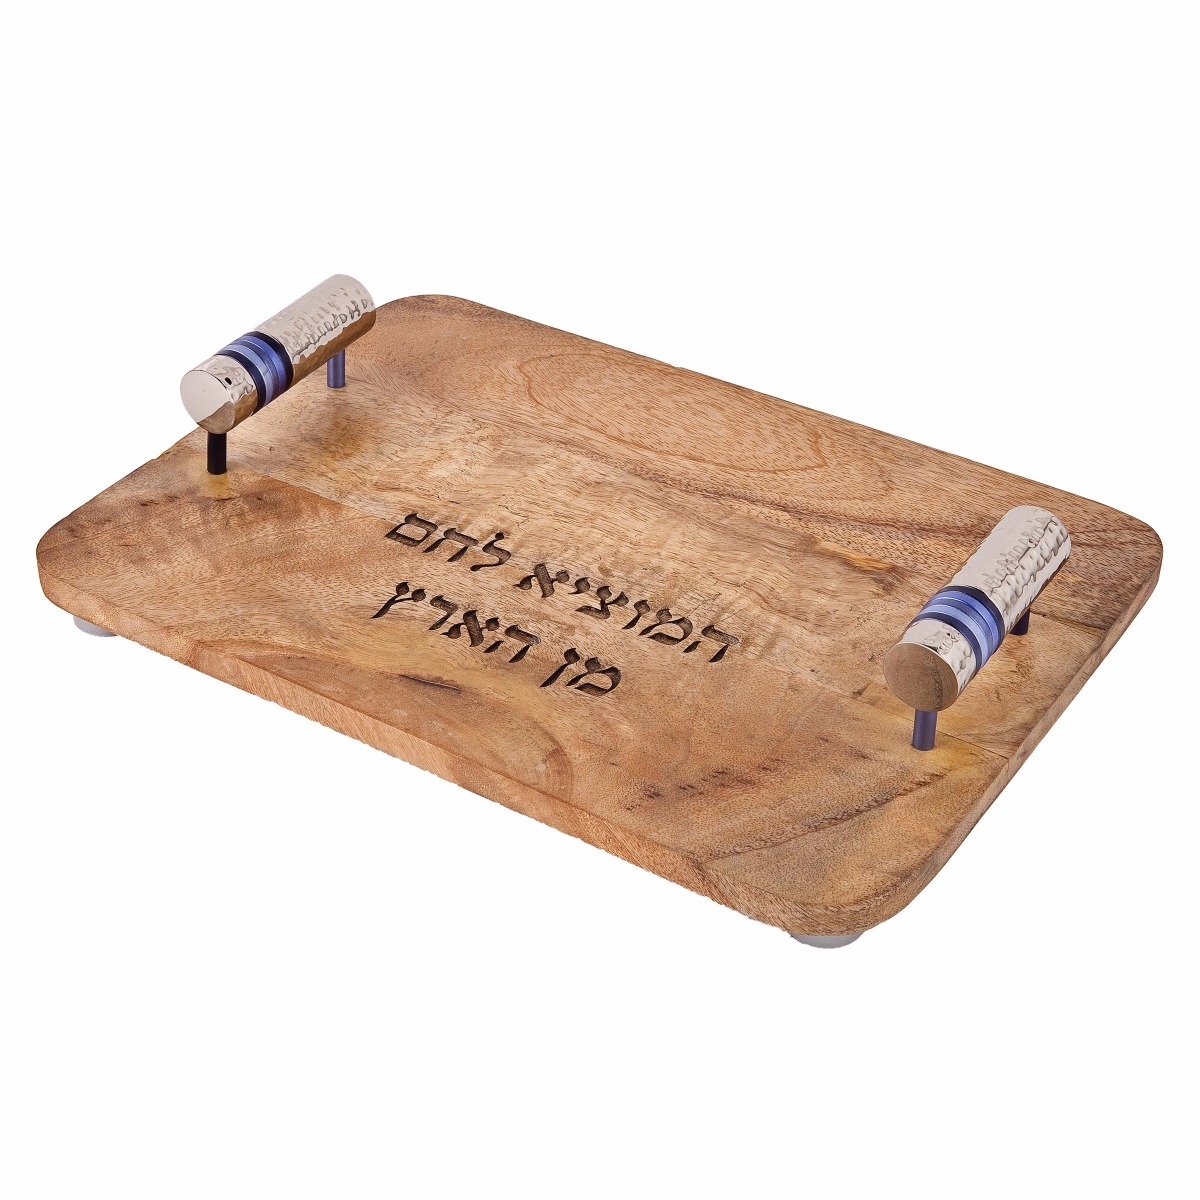 Yair Emanuel Wooden Challah Board with Blessing - Blue (Hebrew) - 1